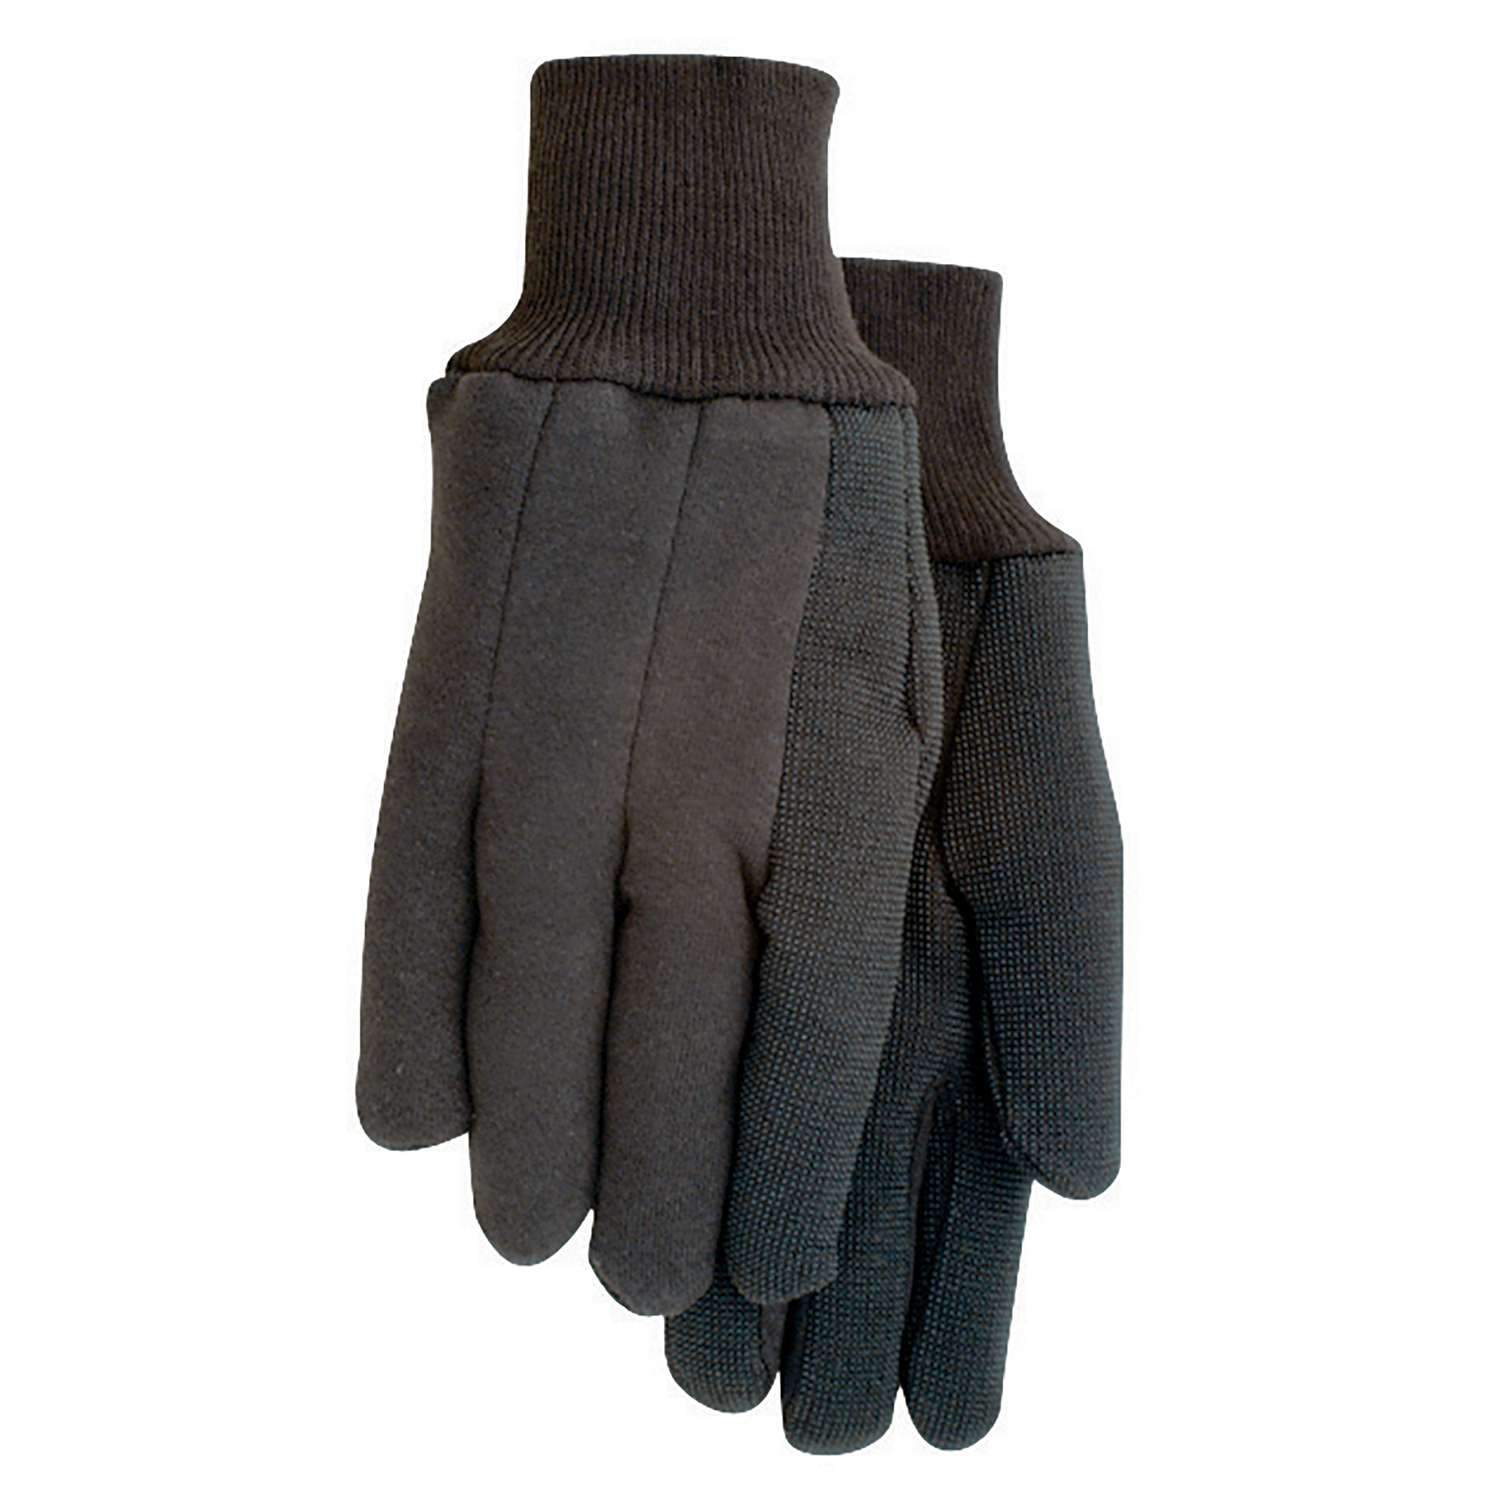 MidWest Quality Gloves L Jersey/Plastic Clute Cut Brown Gloves - Ace ...